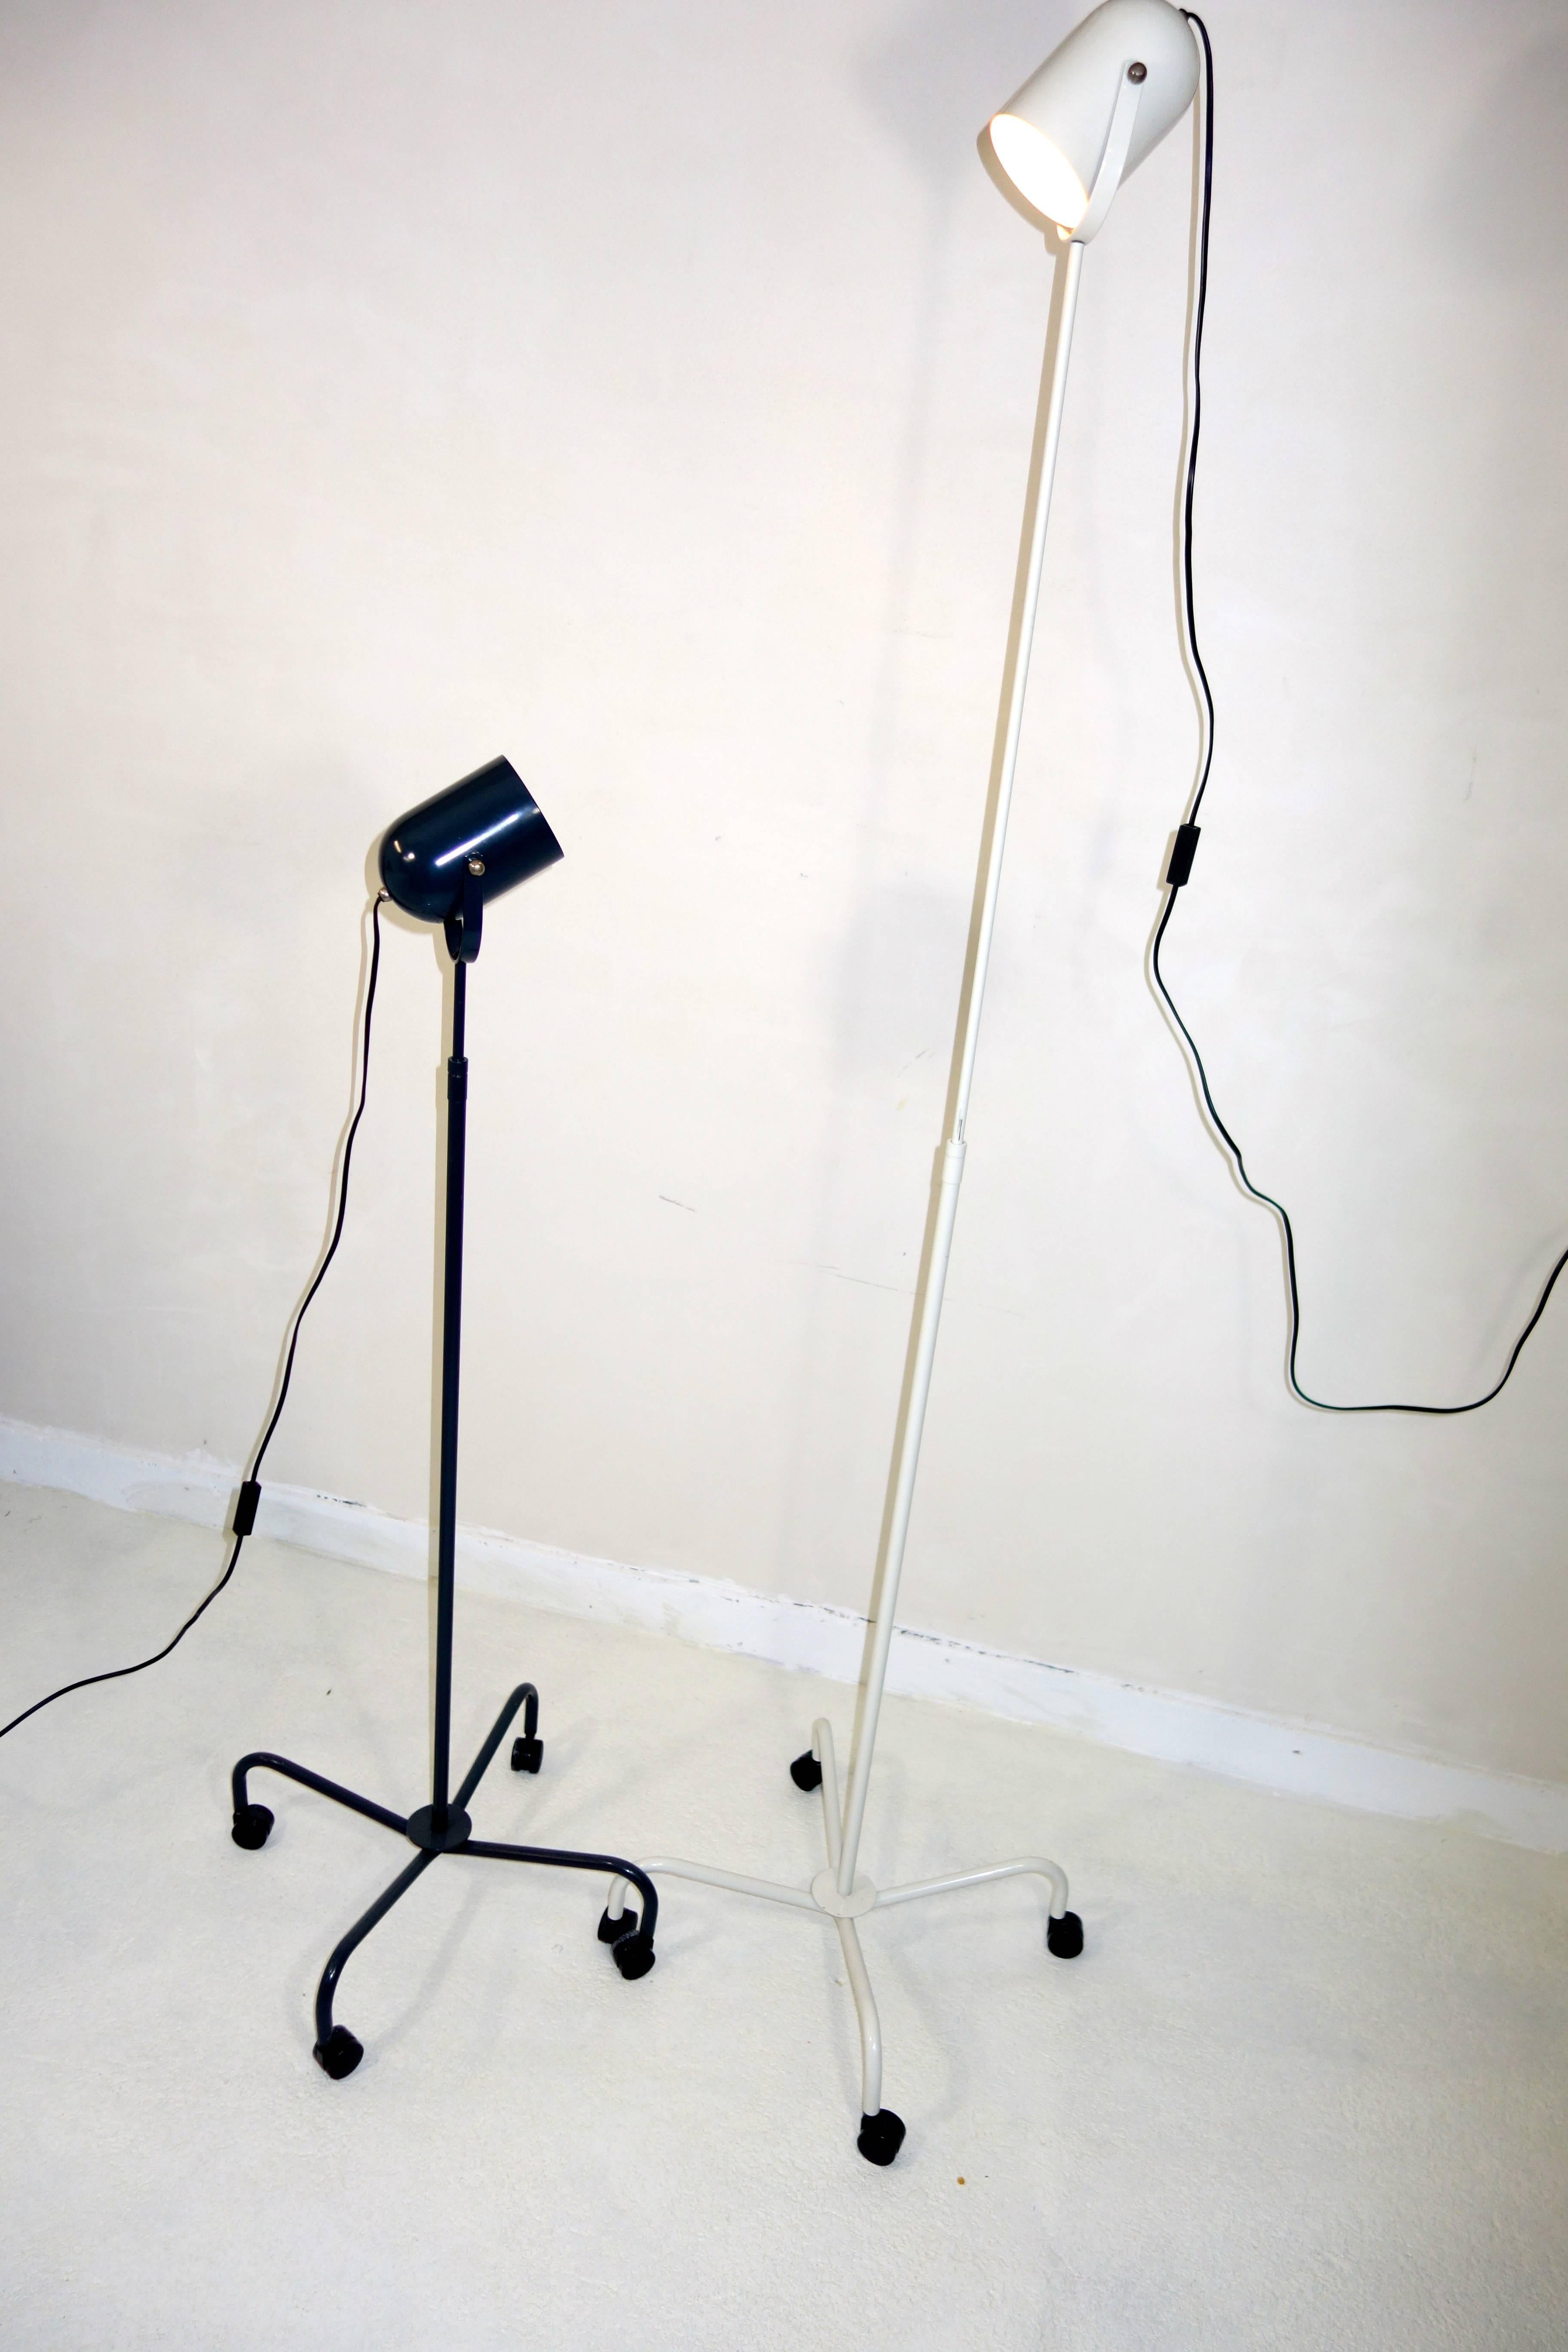 Pair of Postmodern Floor Lamps Panto Beam by Danish designer Verner Panton.
One black and one white Panto Beam, this pair of lamps was designed by Verner Panton in 1998. 
The lamps are very flexible, not only due to their wheels but also because the